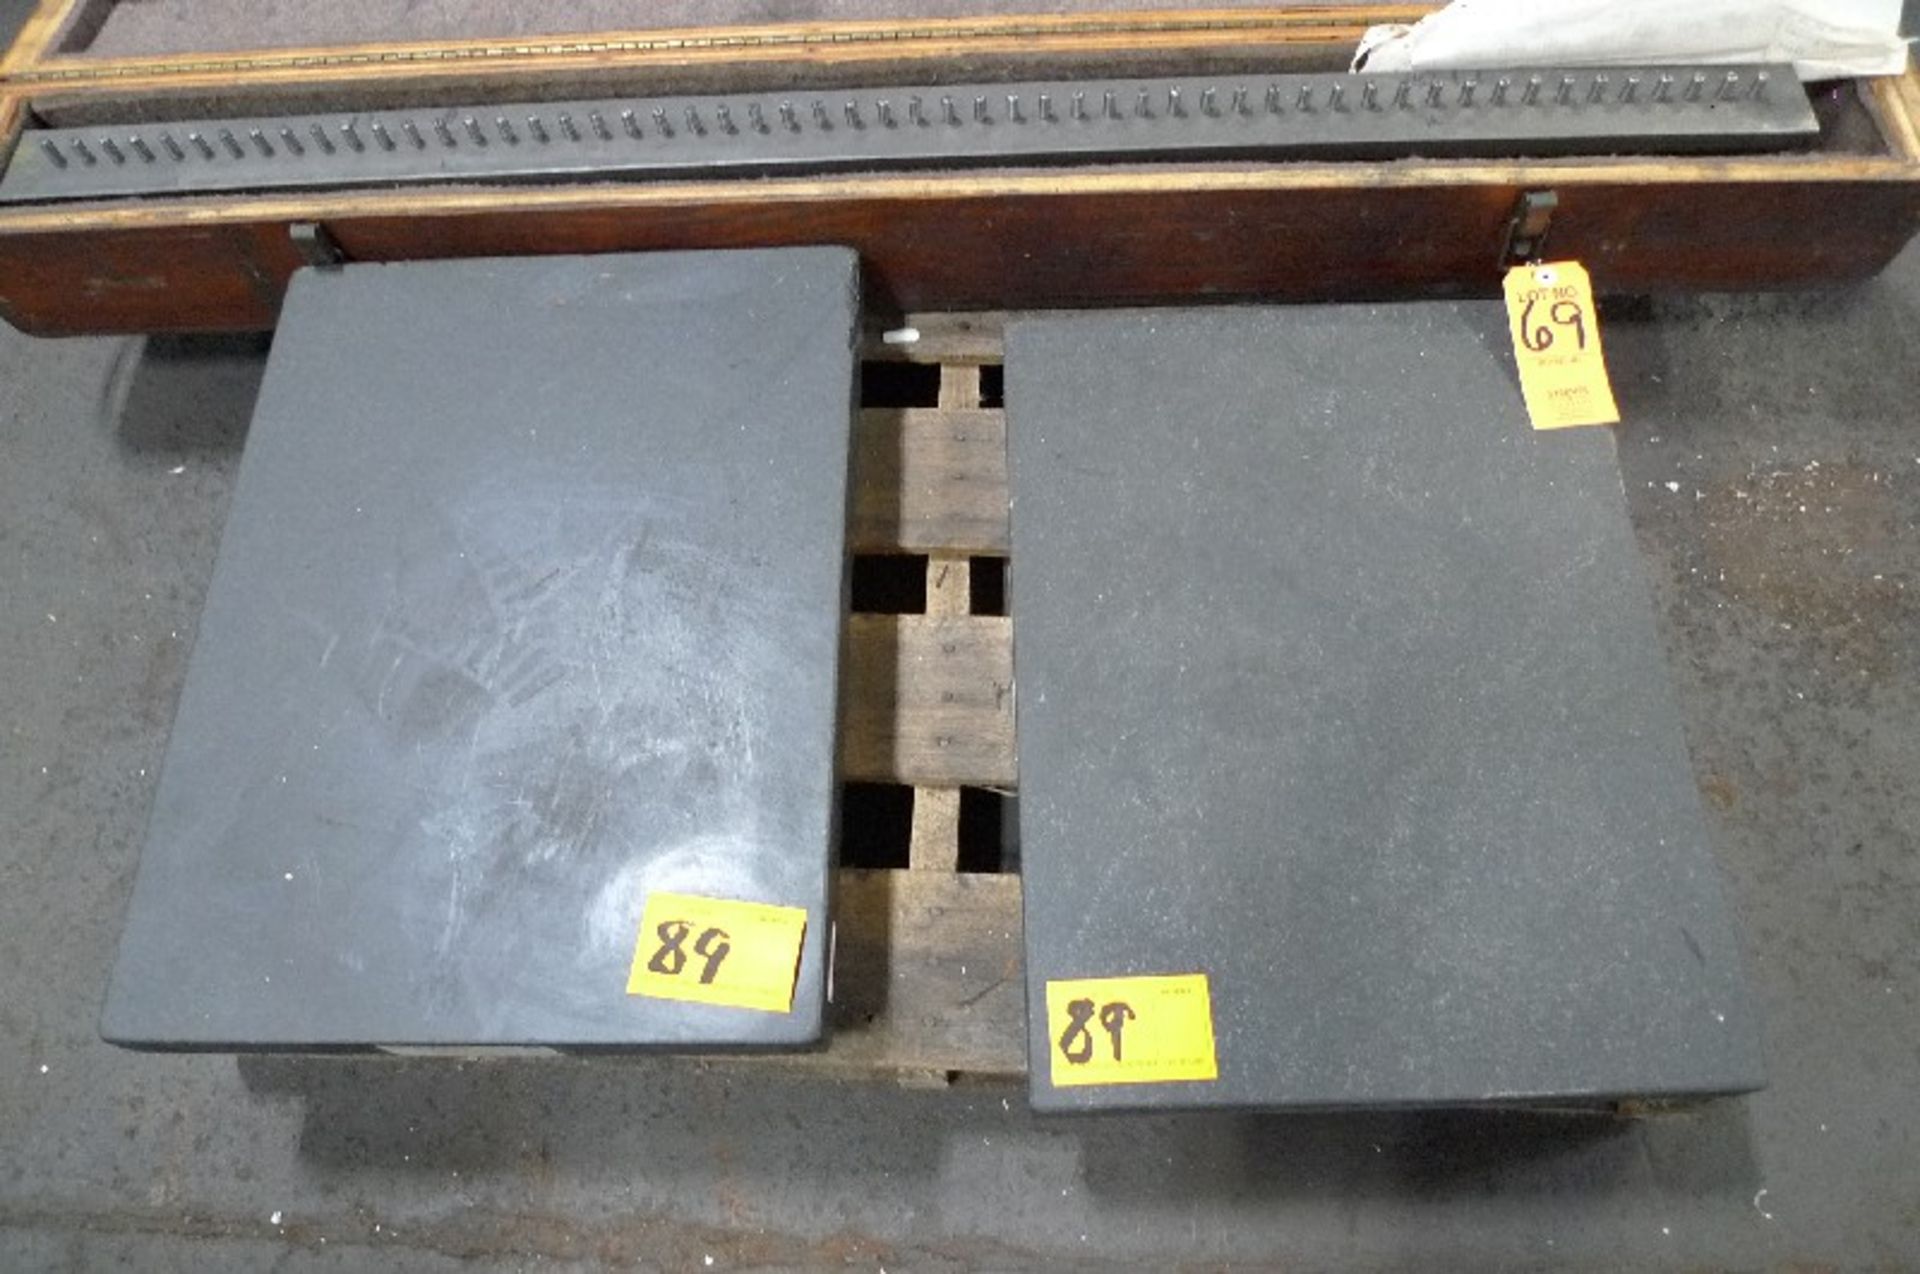 LOT: (2) 18 X 24" SURFACE PLATES